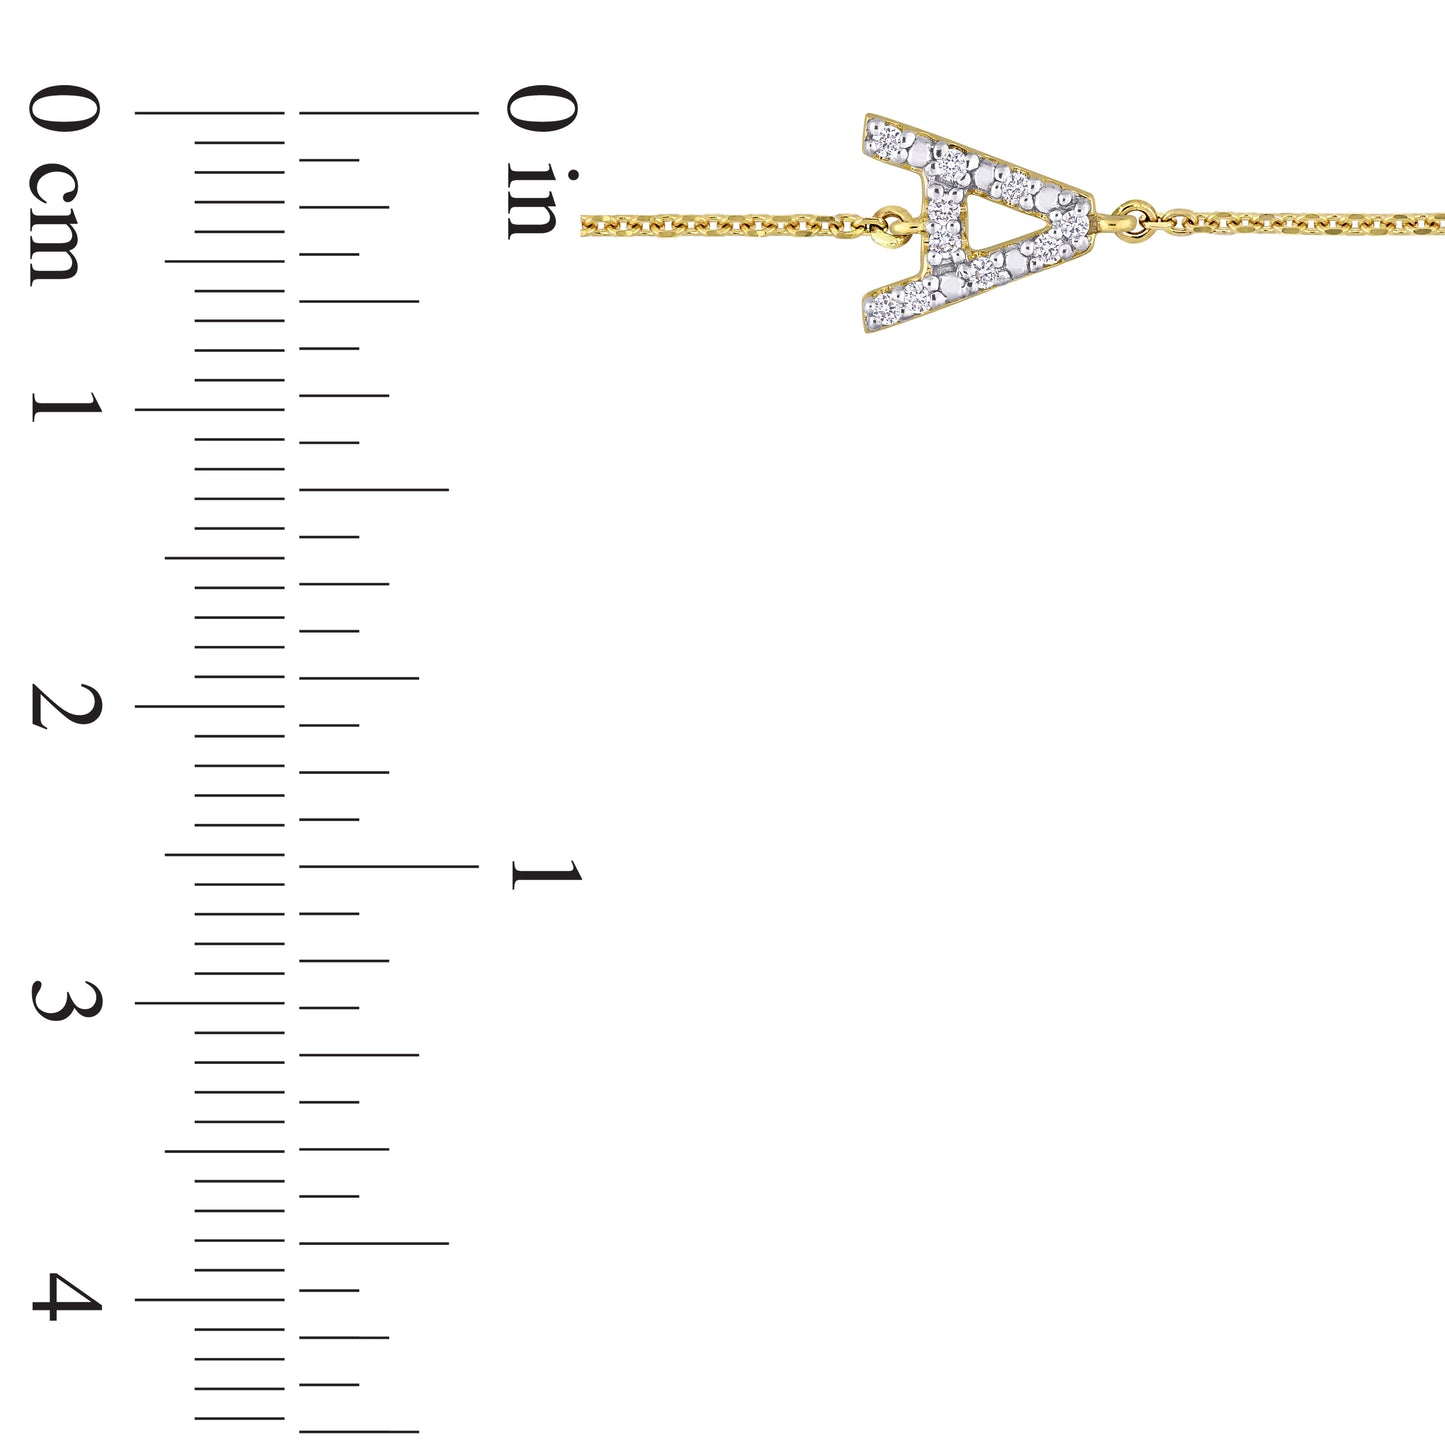 Diamond Letter Necklace in 14k Yellow Gold